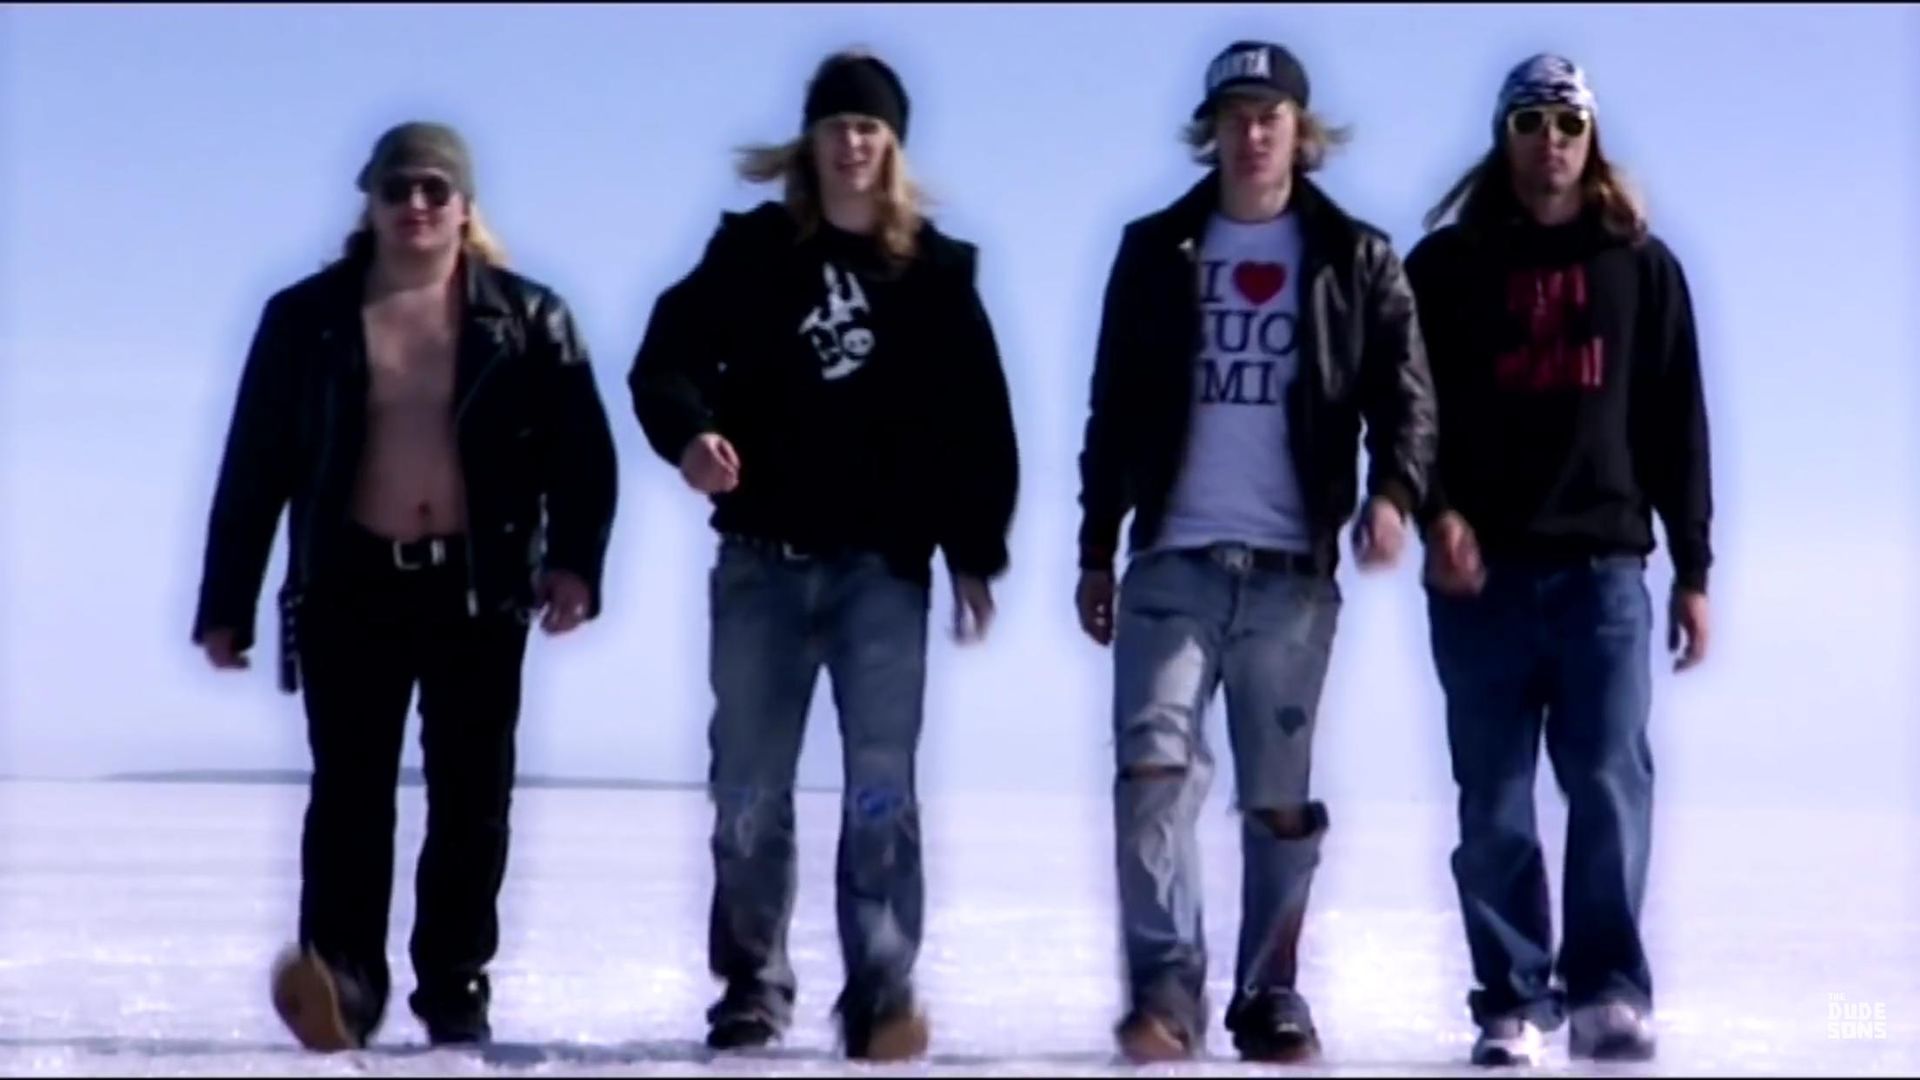 The Dudesons background